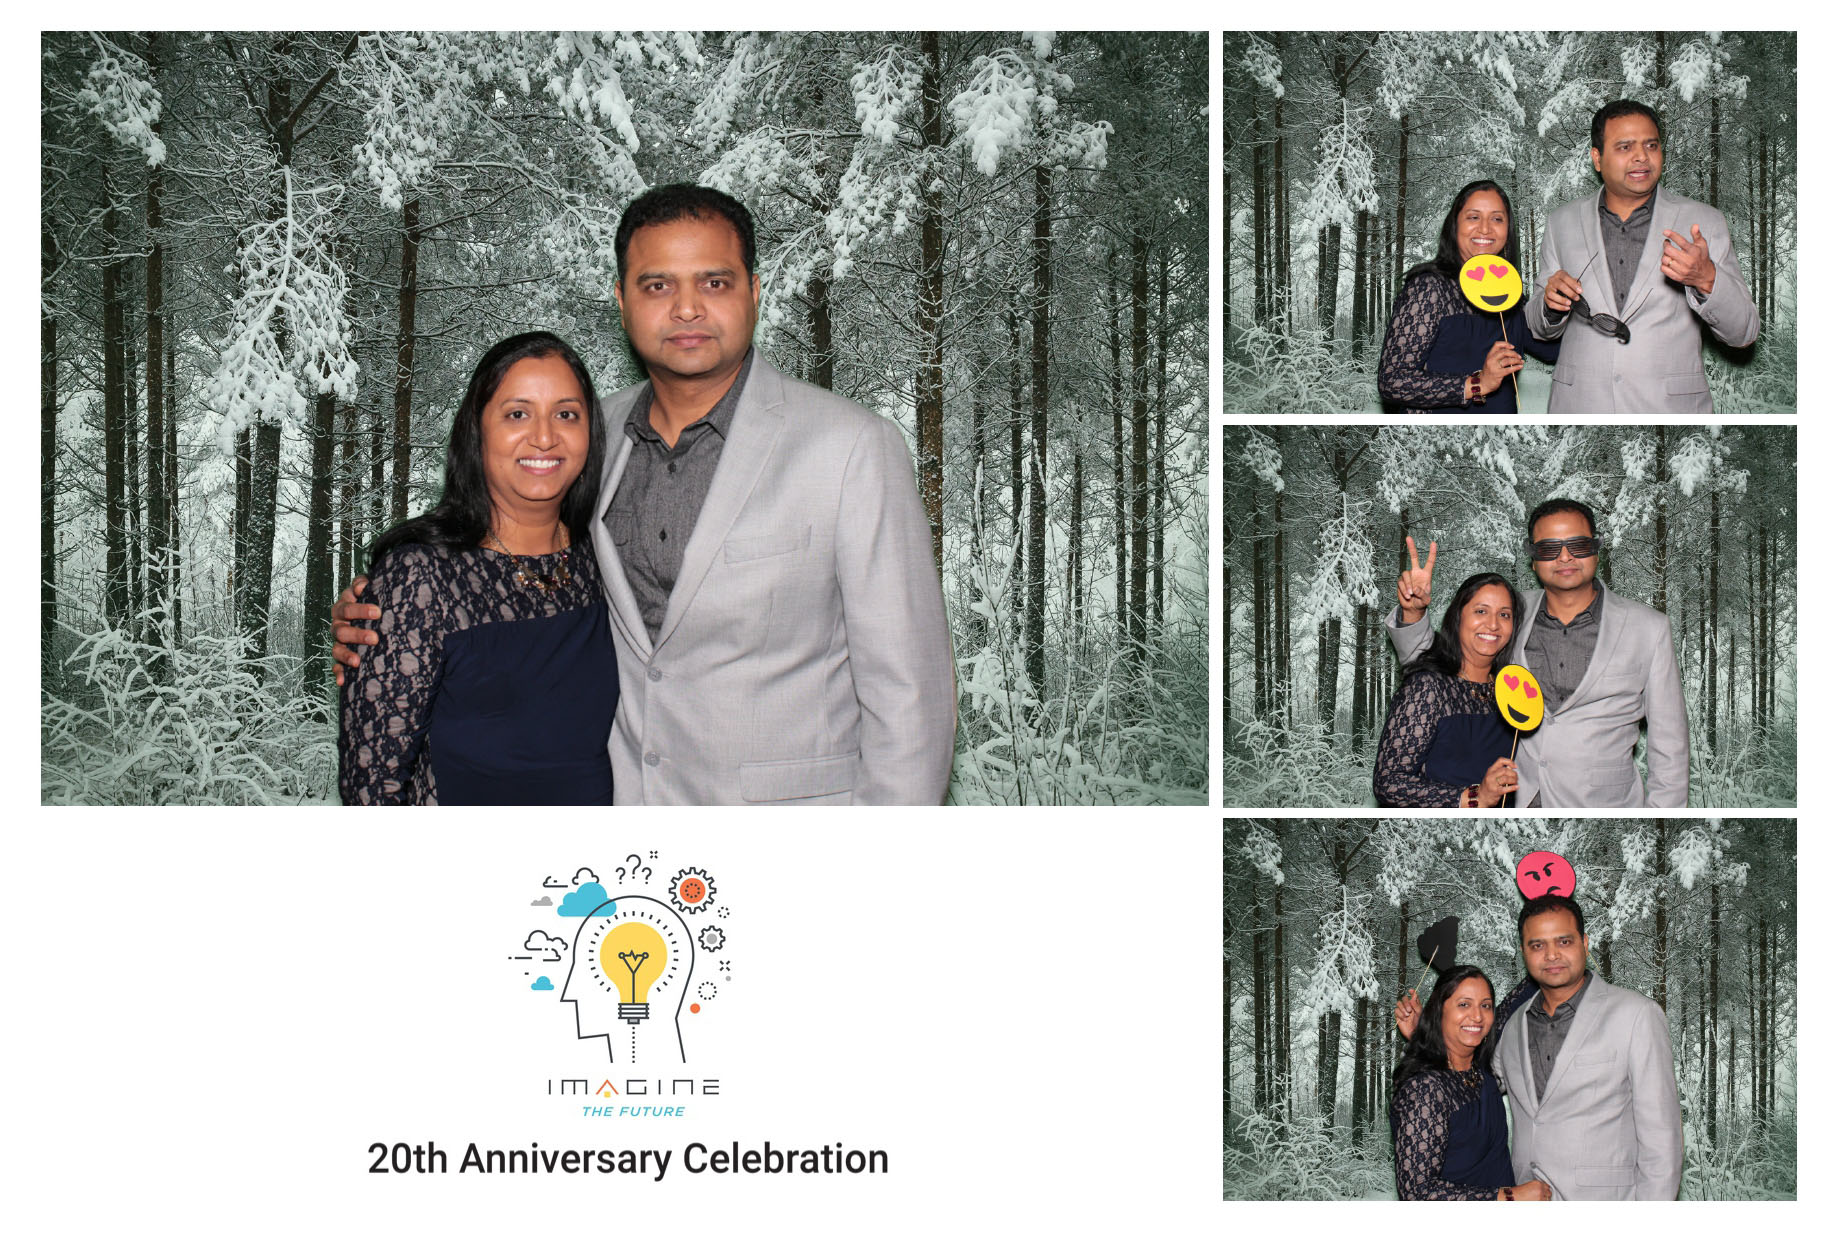 A green screen photo booth photo of realtors at the 2016 realtor.com and move.com Holiday party in Westlake Village, Los Angeles, CA